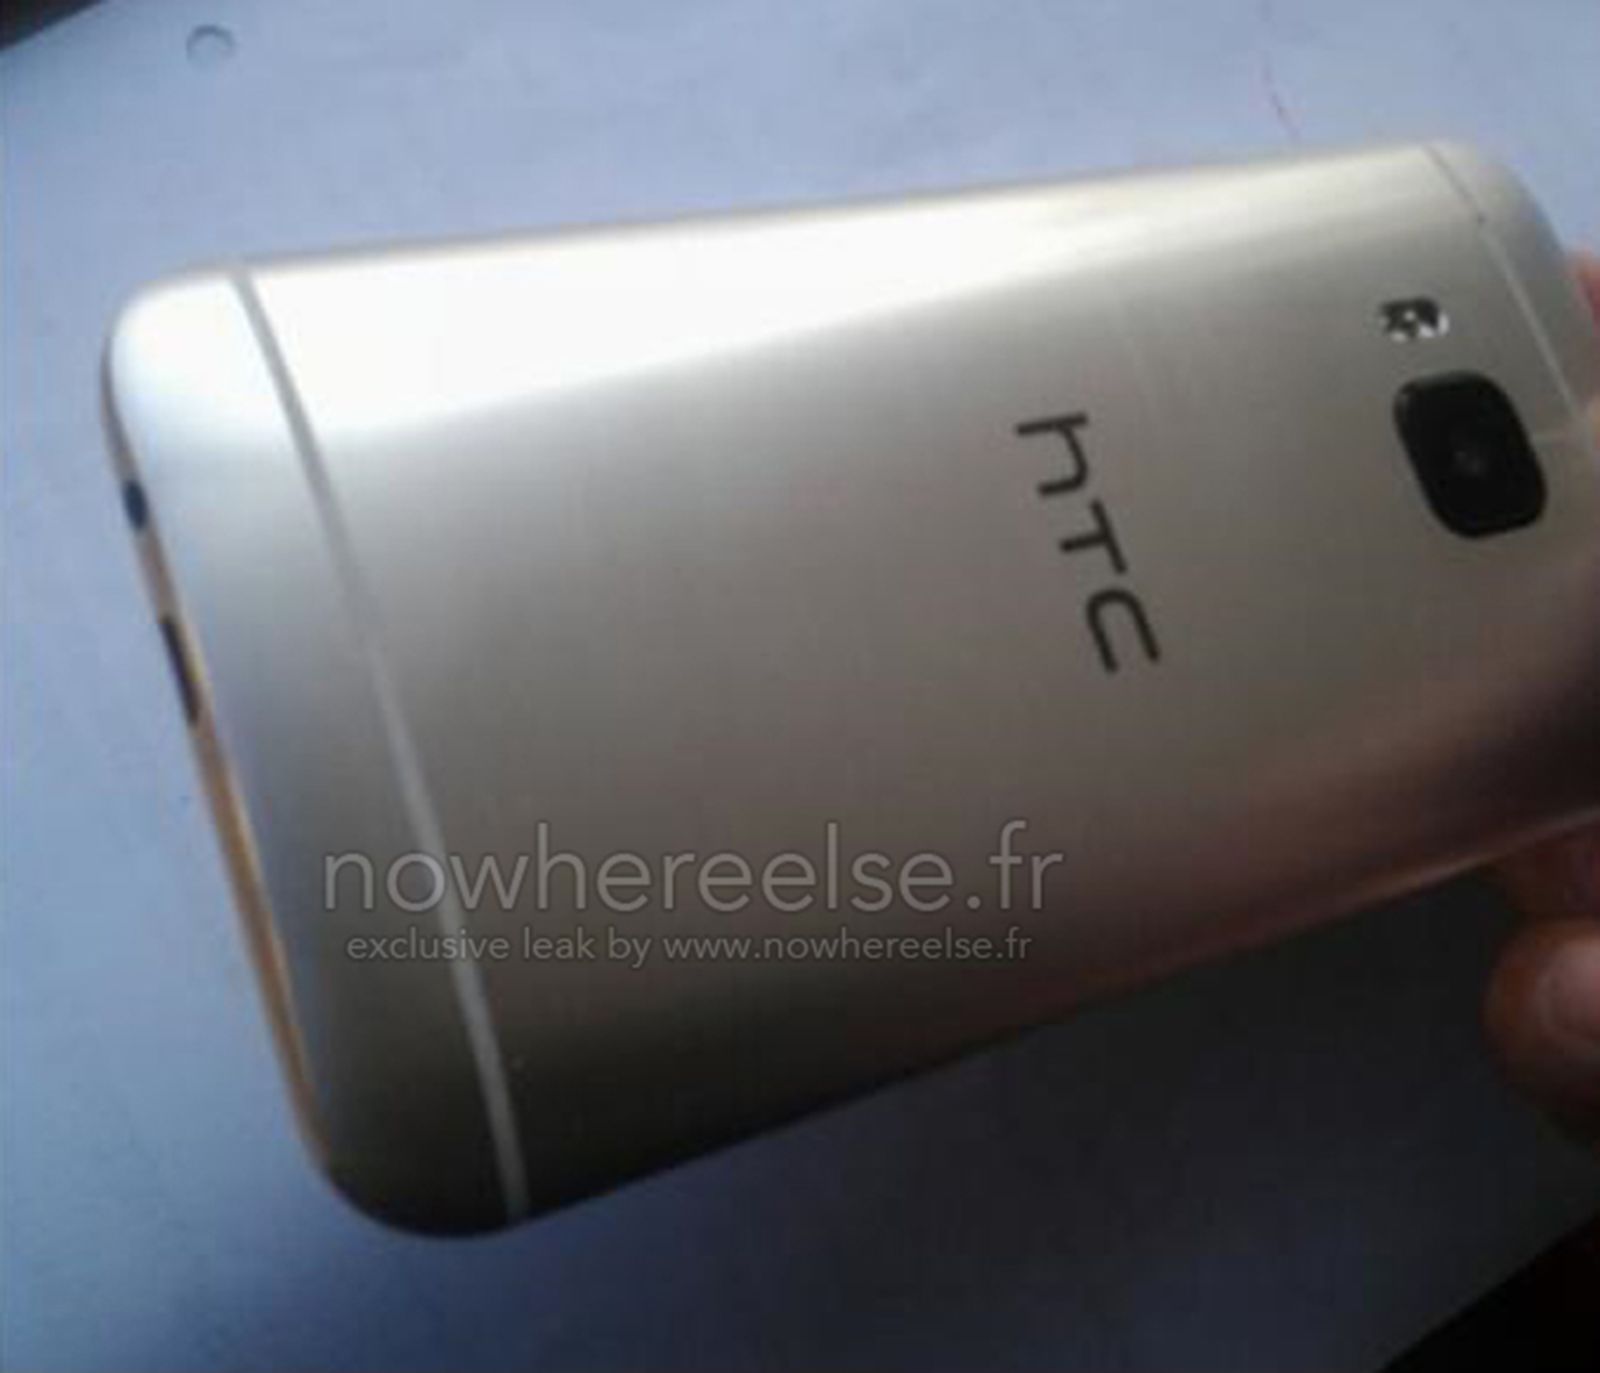 htc one m9 photos leak with full specs 1080p snapdragon 810 and 20 7mp image 3